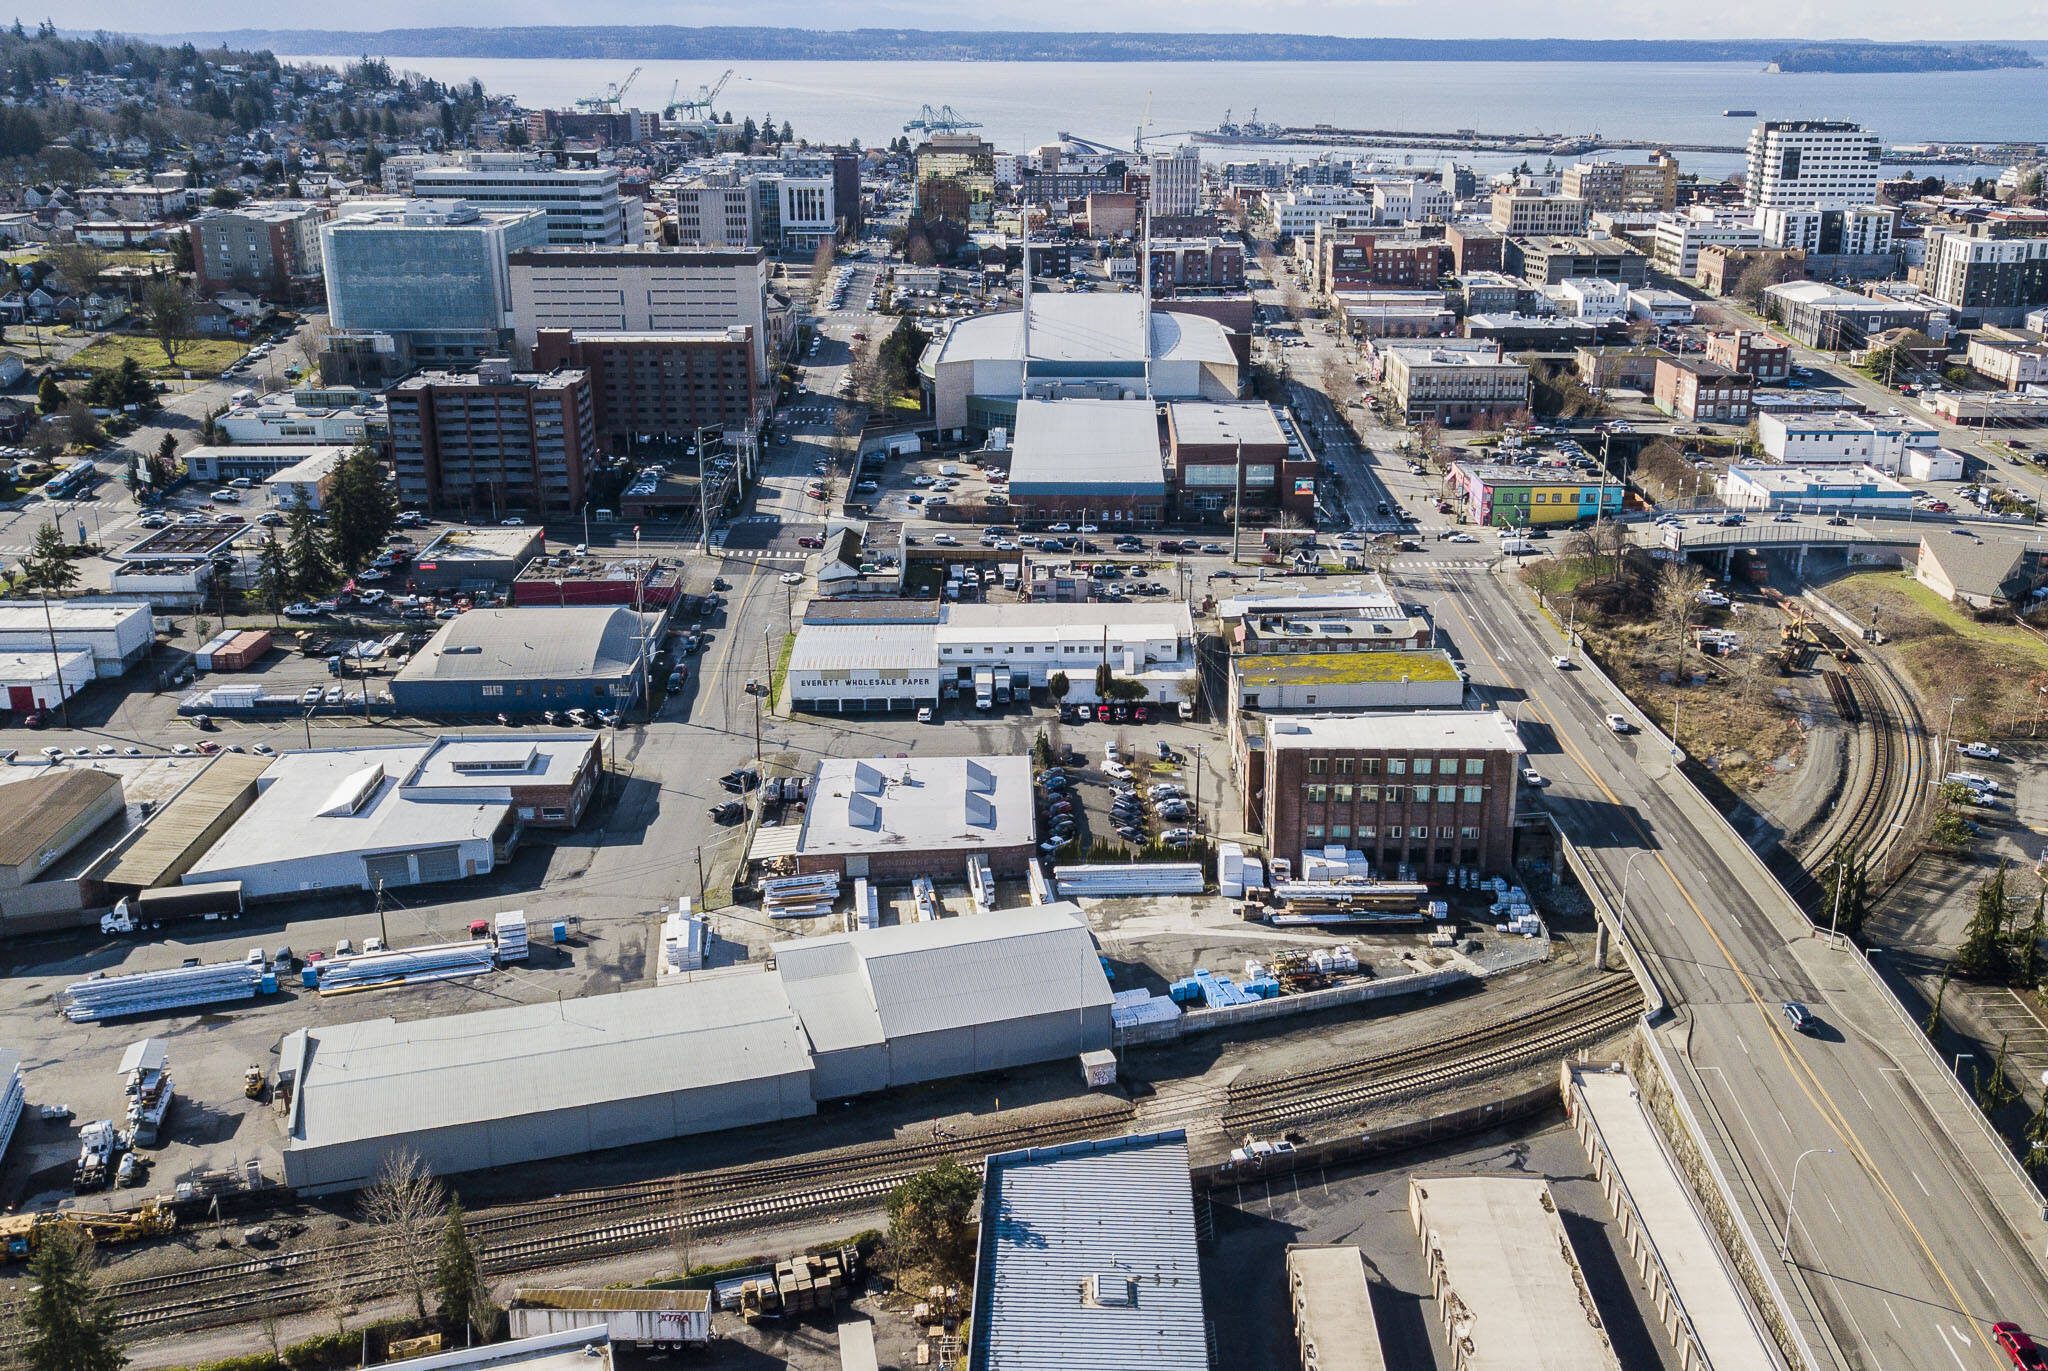 A view of one of the potential locations of the new Aquasox stadium on Monday, Feb. 26, 2024 in Everett, Washington. The site sits between Hewitt Avenue, Broadway, Pacific Avenue and the railroad. (Olivia Vanni / The Herald)